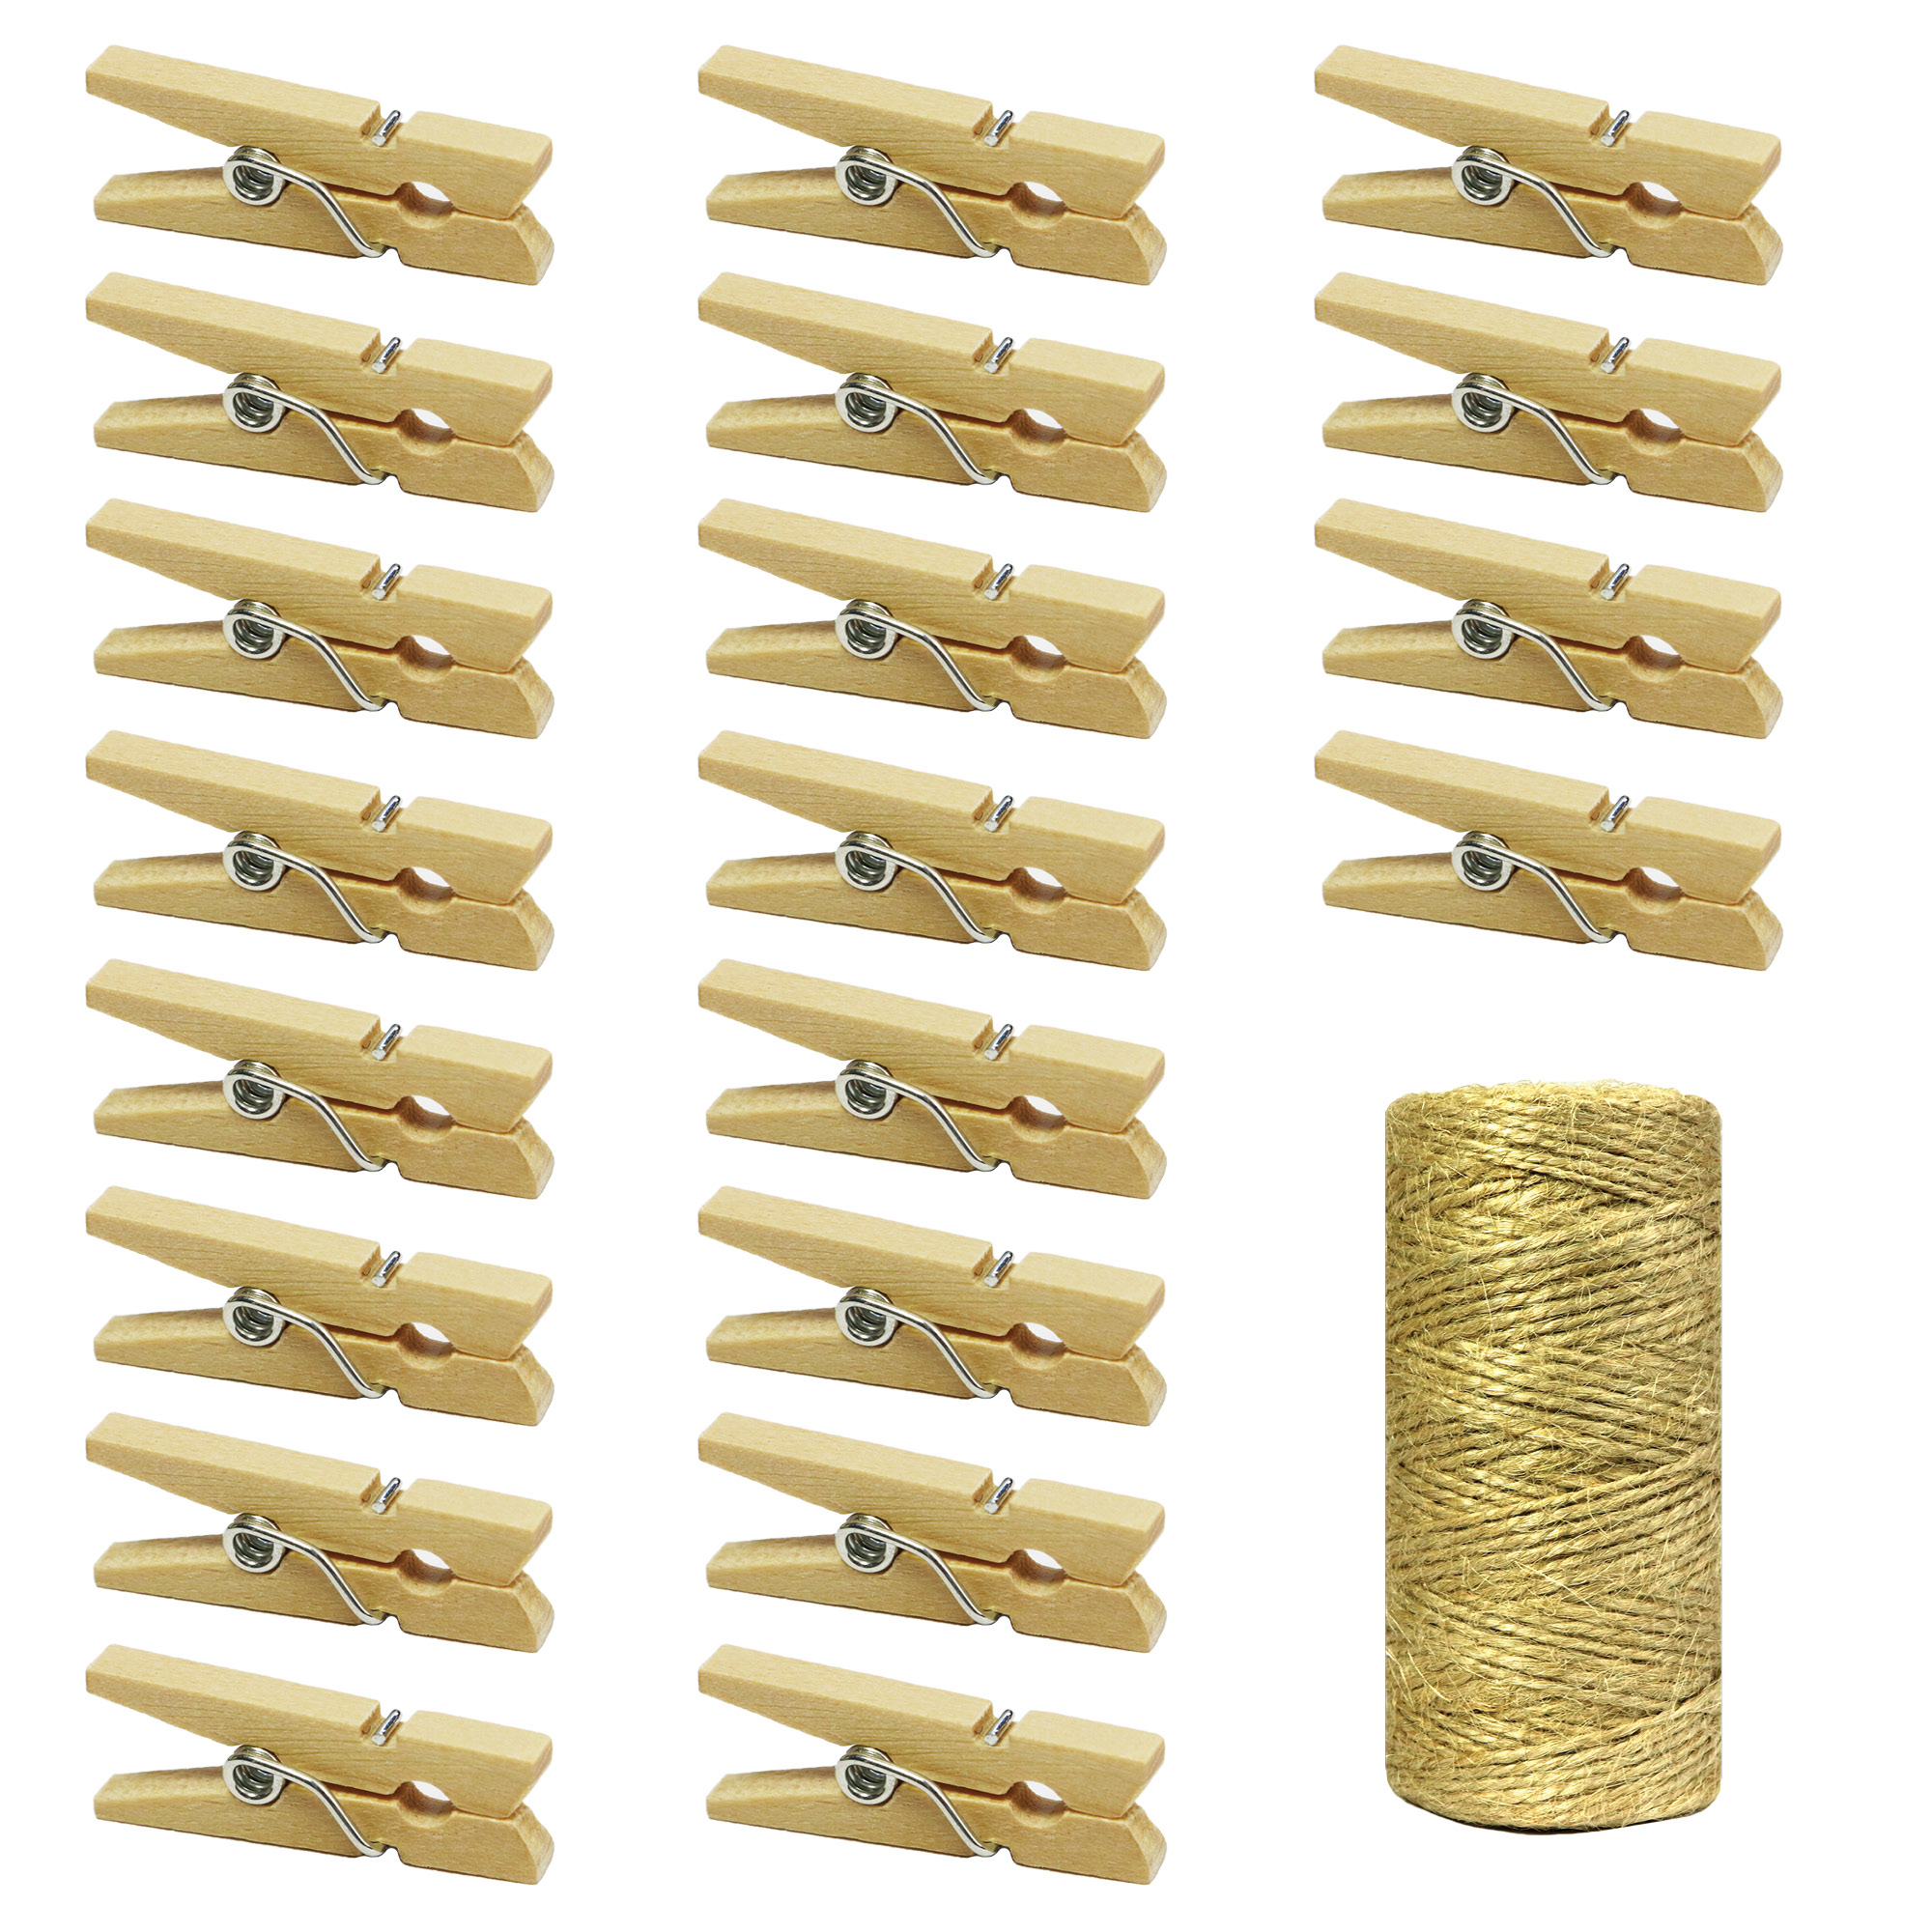 Mini Natural Wooden Clothespins with Jute Twine, 250pcs, 1 Inch Photo Paper  Peg Pin Craft Clips with 66ft Natural Twine for Scrapbooking, Arts 